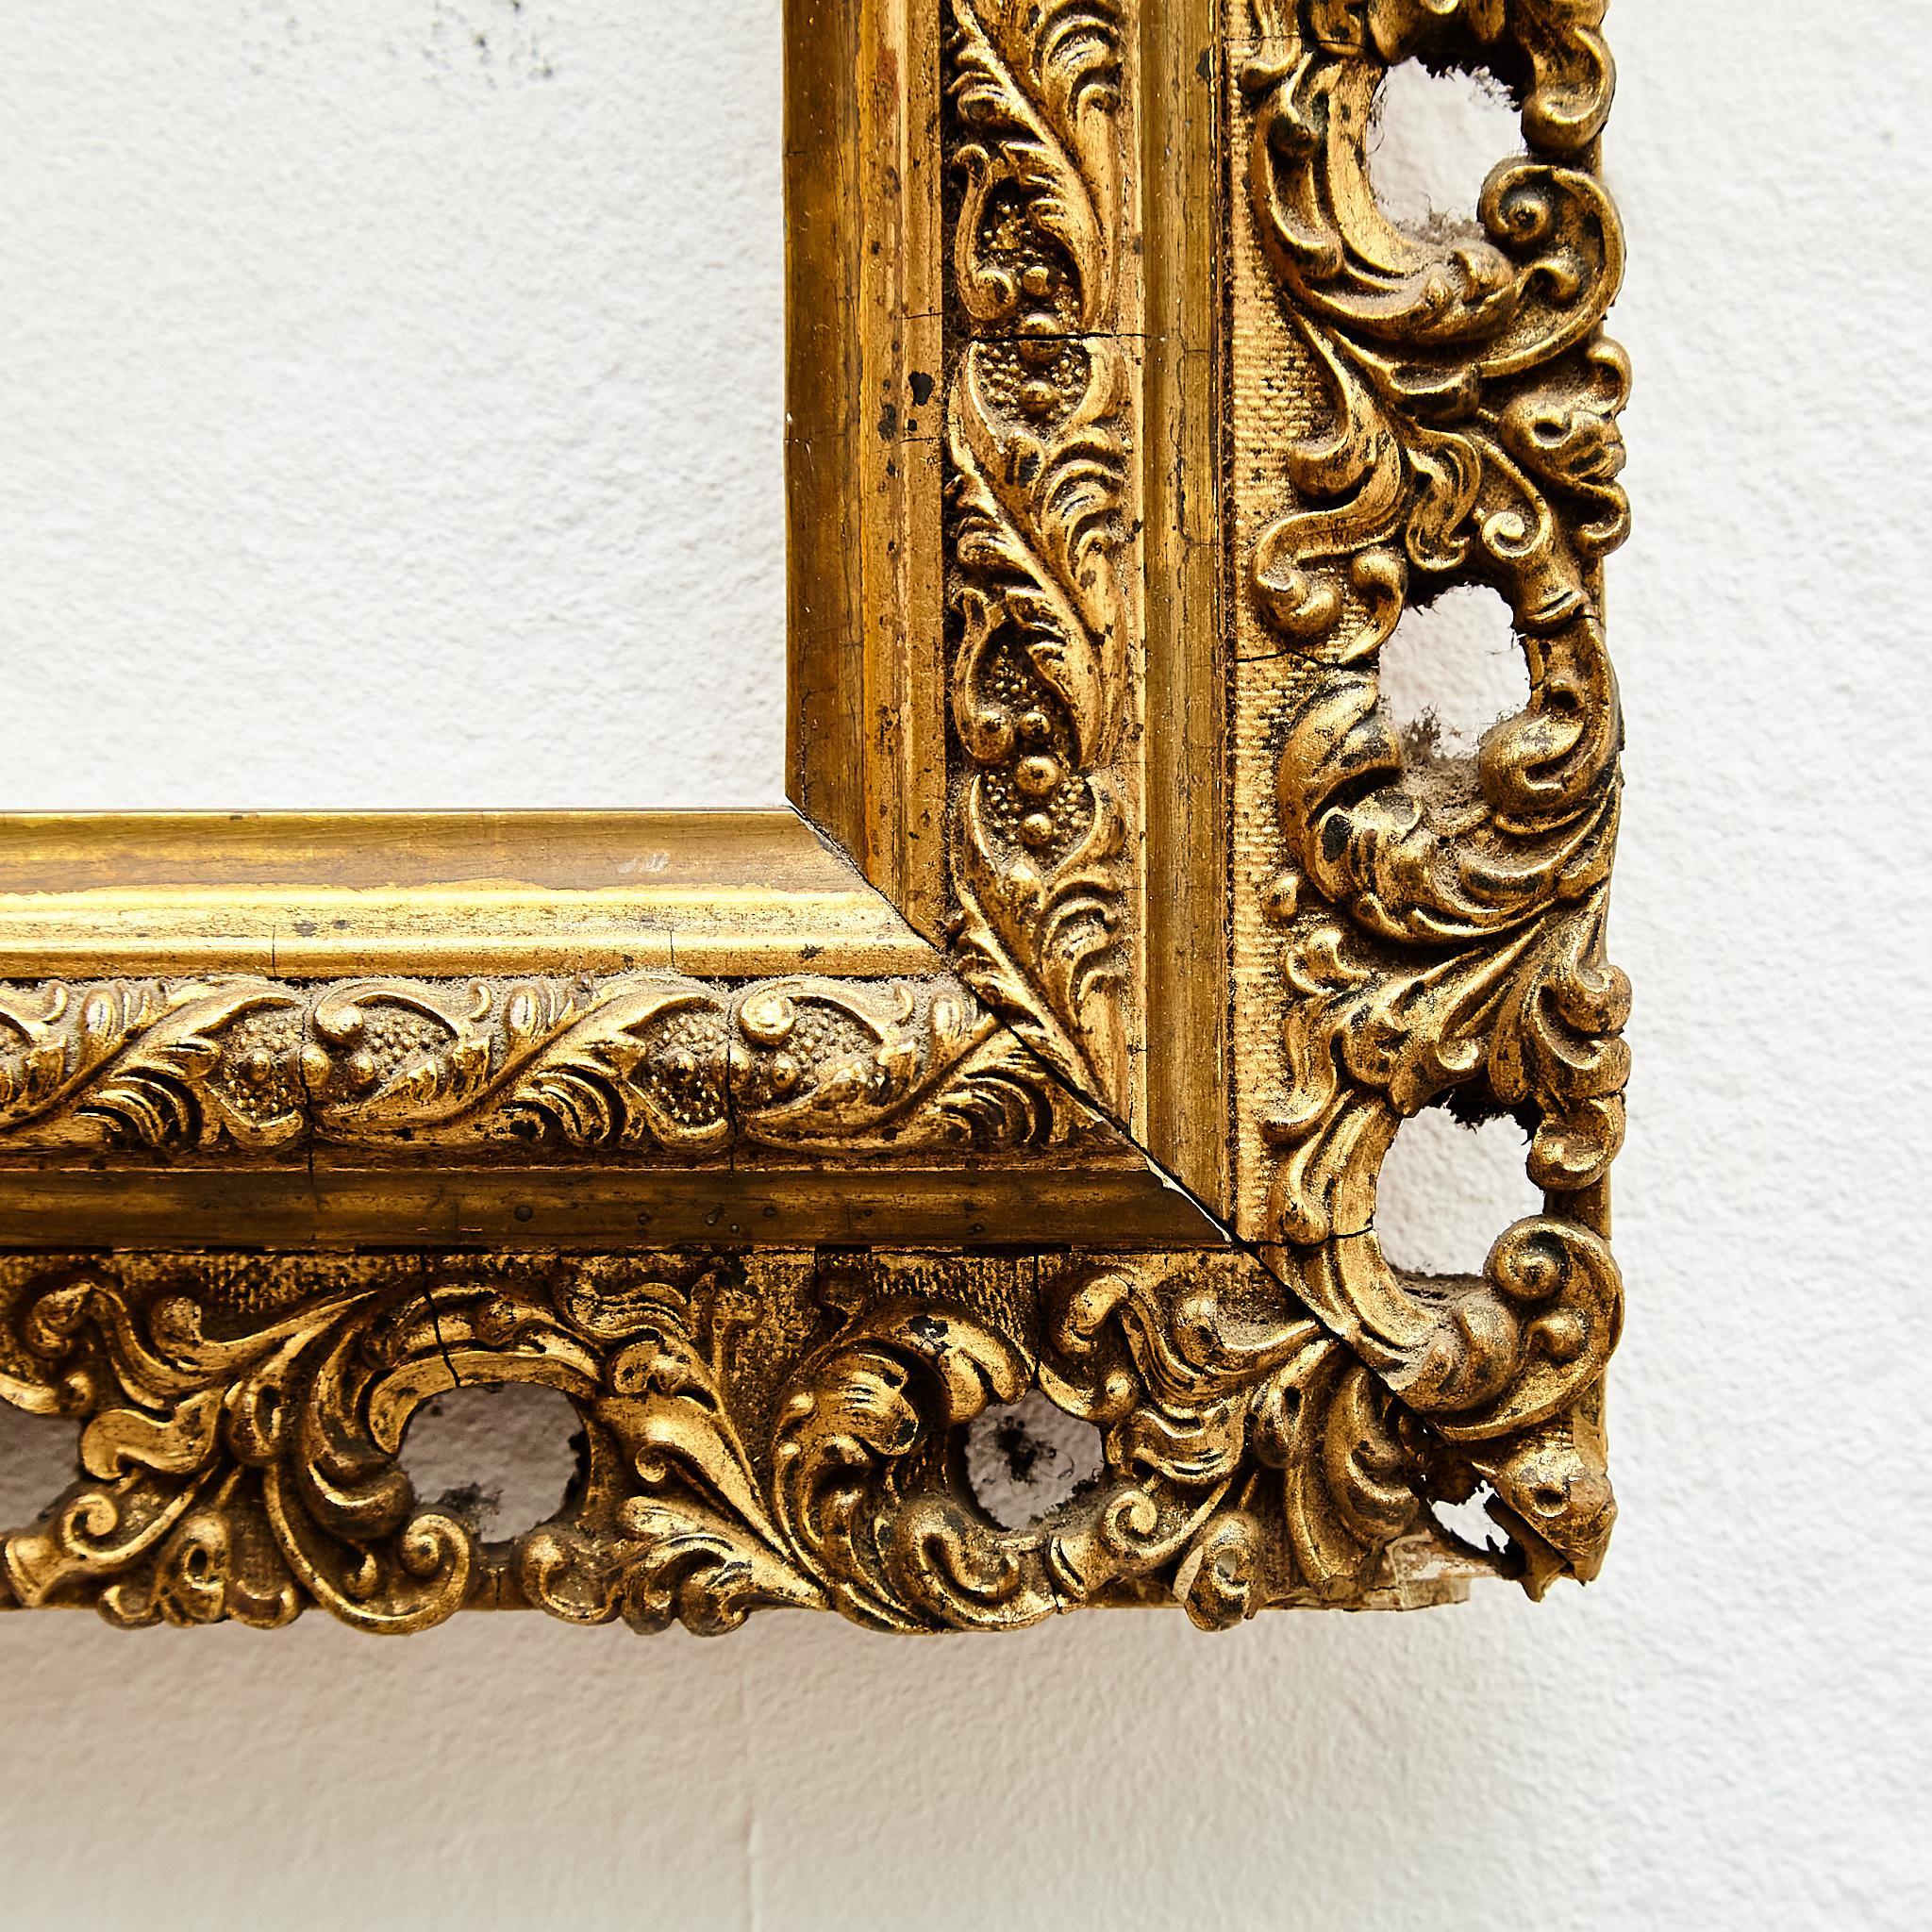 Hand-Painted Antique Ornament Gold Wood Frame, circa 1930 For Sale